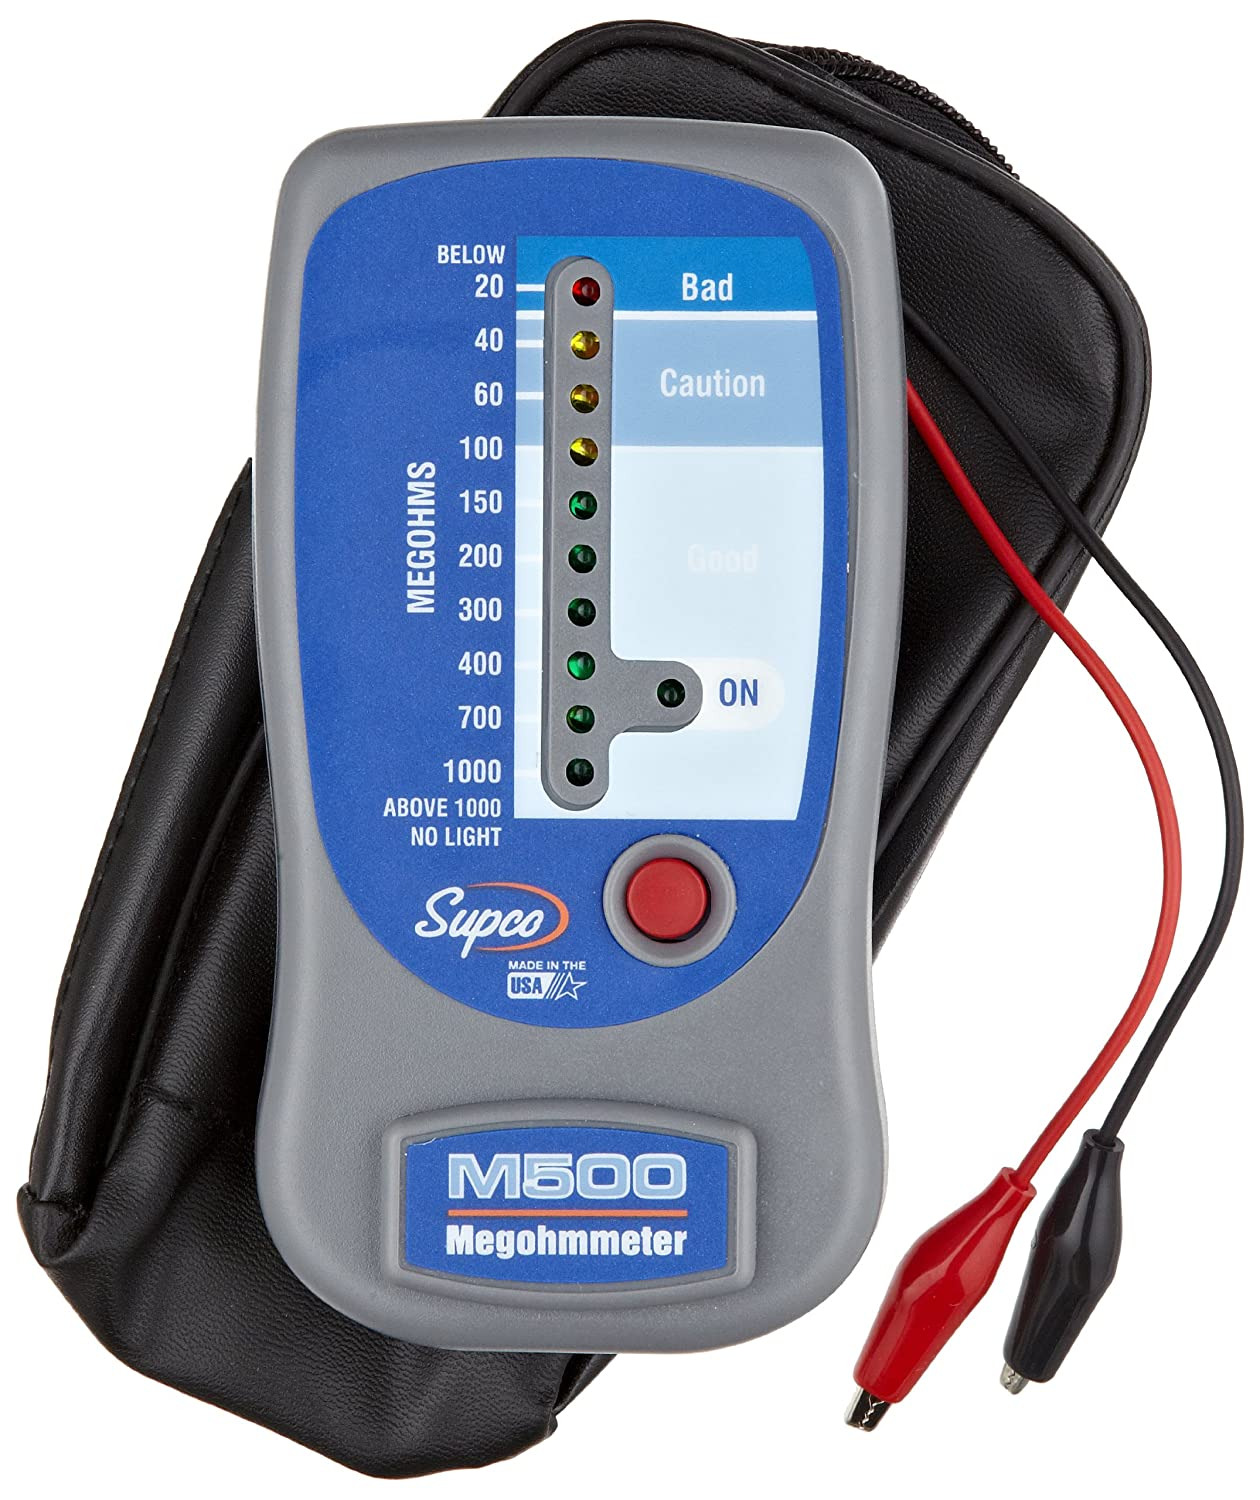 Supco M500 Insulation Tester/Electronic Megohmmeter with Soft Carrying Case